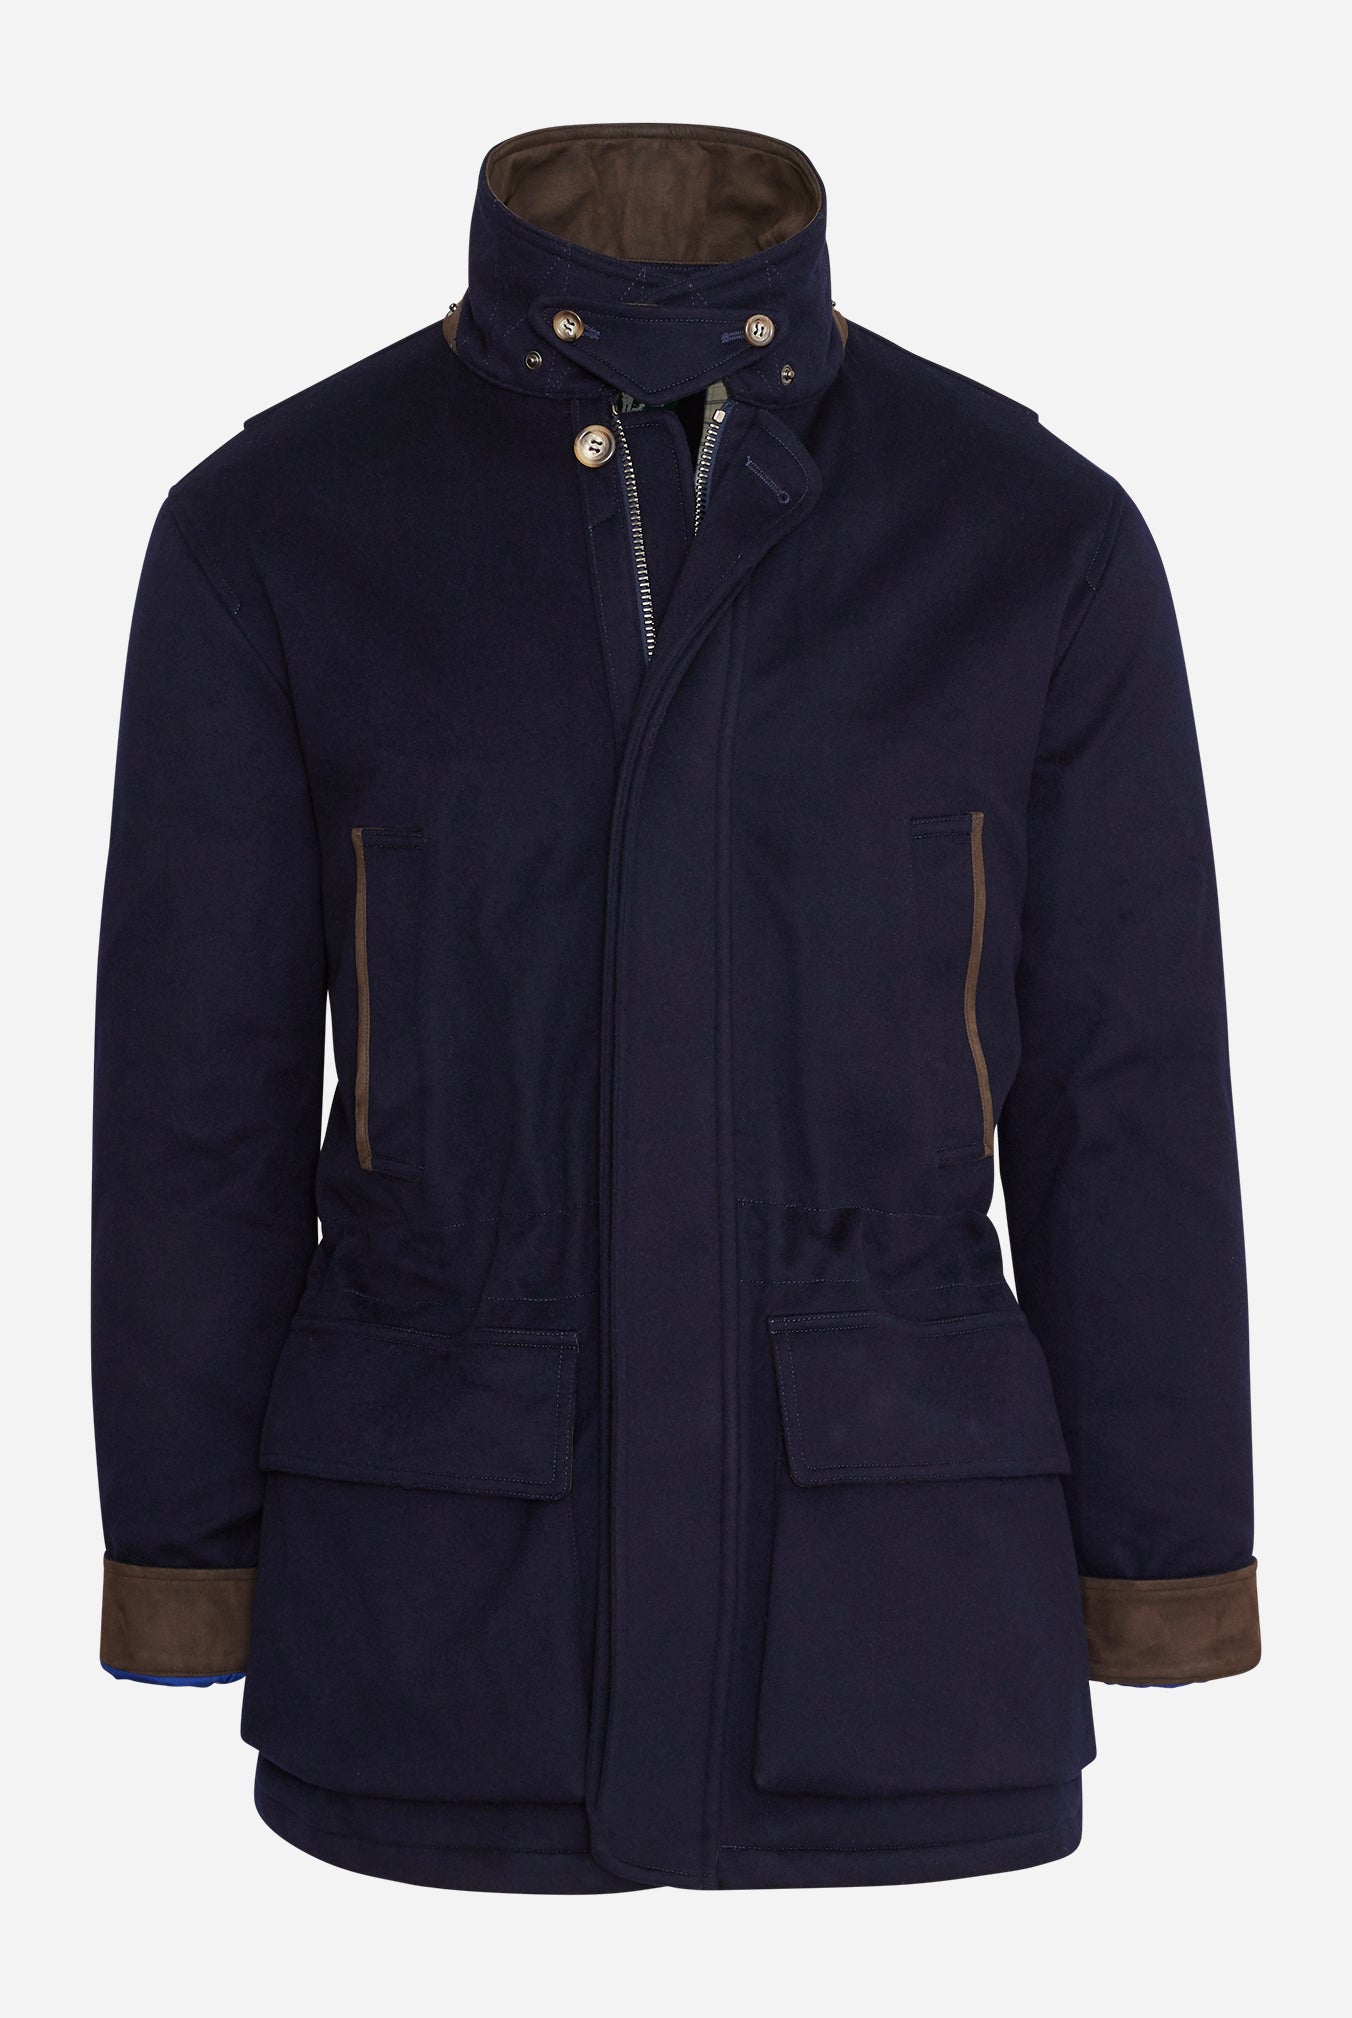 Storm System Wool Ralph Coat in Navy